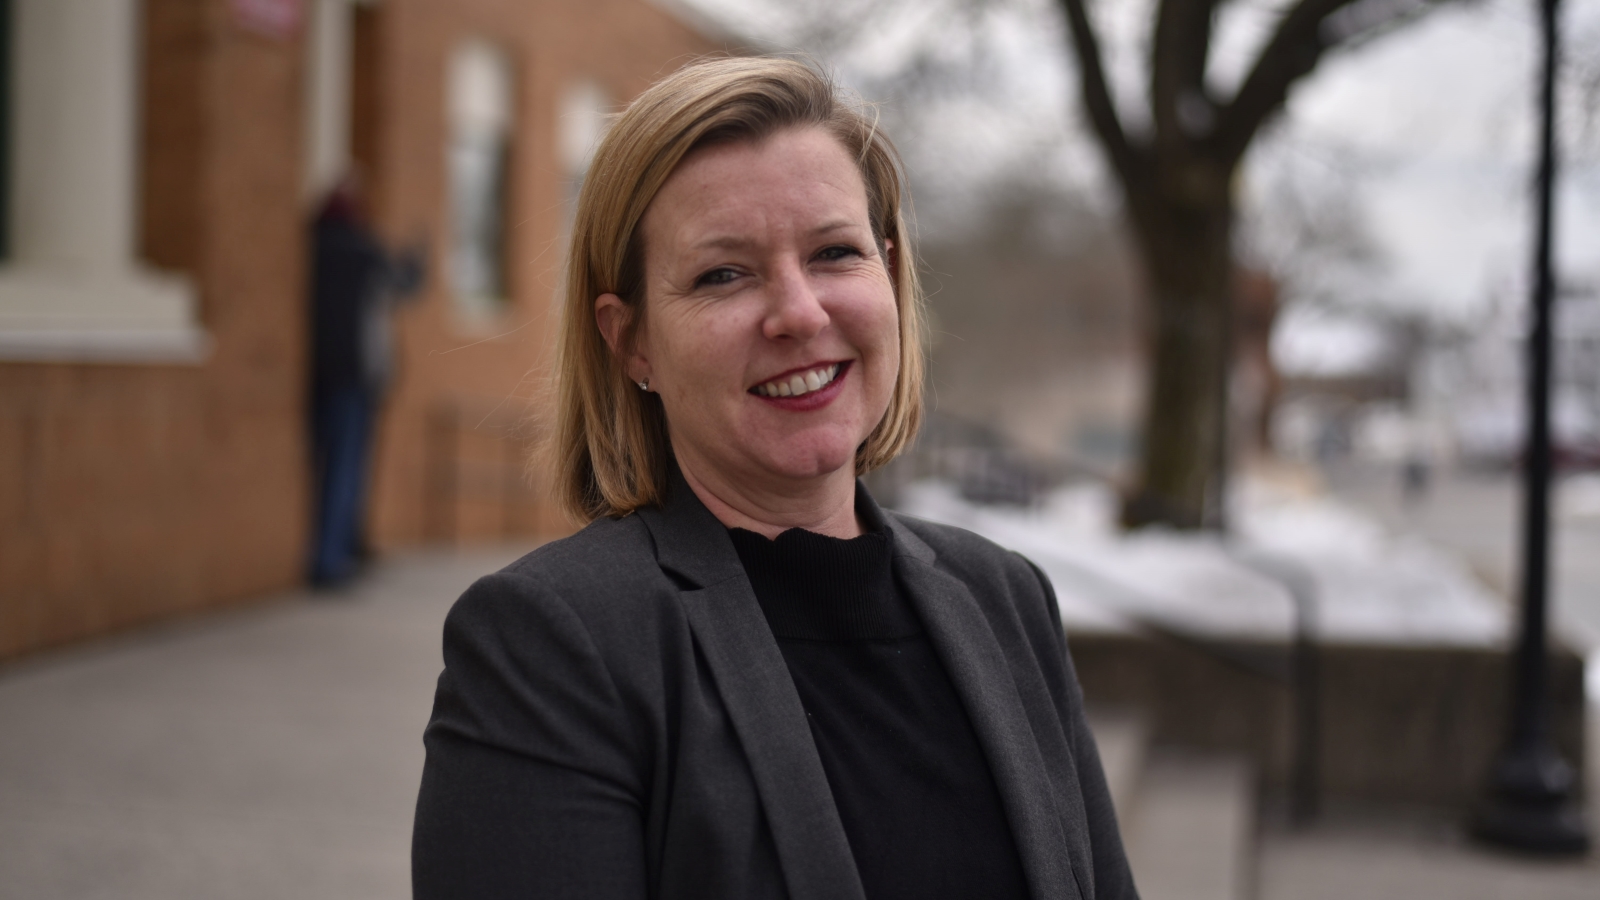 Shannon McMahon, a former Bristol County prosecutor, is running against her onetime boss, District Attorney Thomas Quinn III.